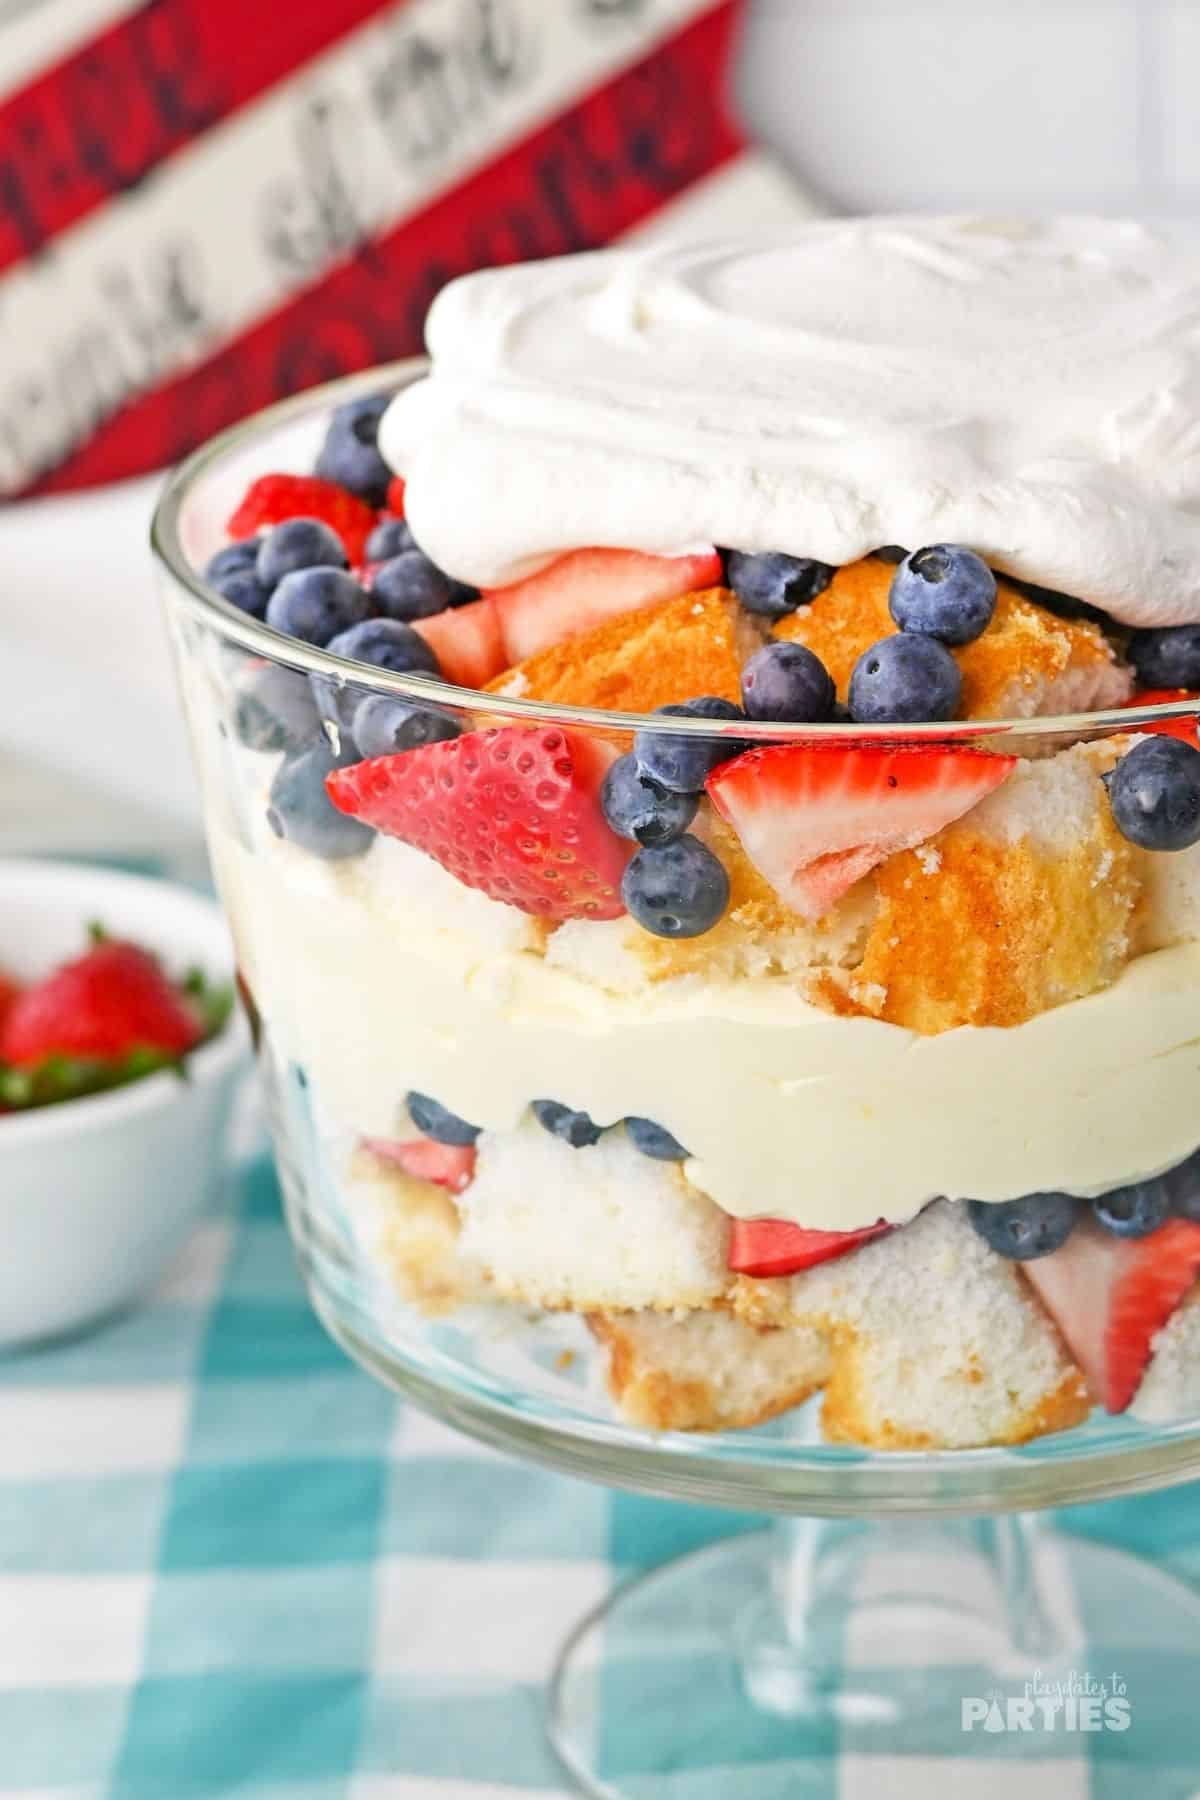 Patriotic layers of berries, pudding, and cake are revealed through the clear trifle bowl.